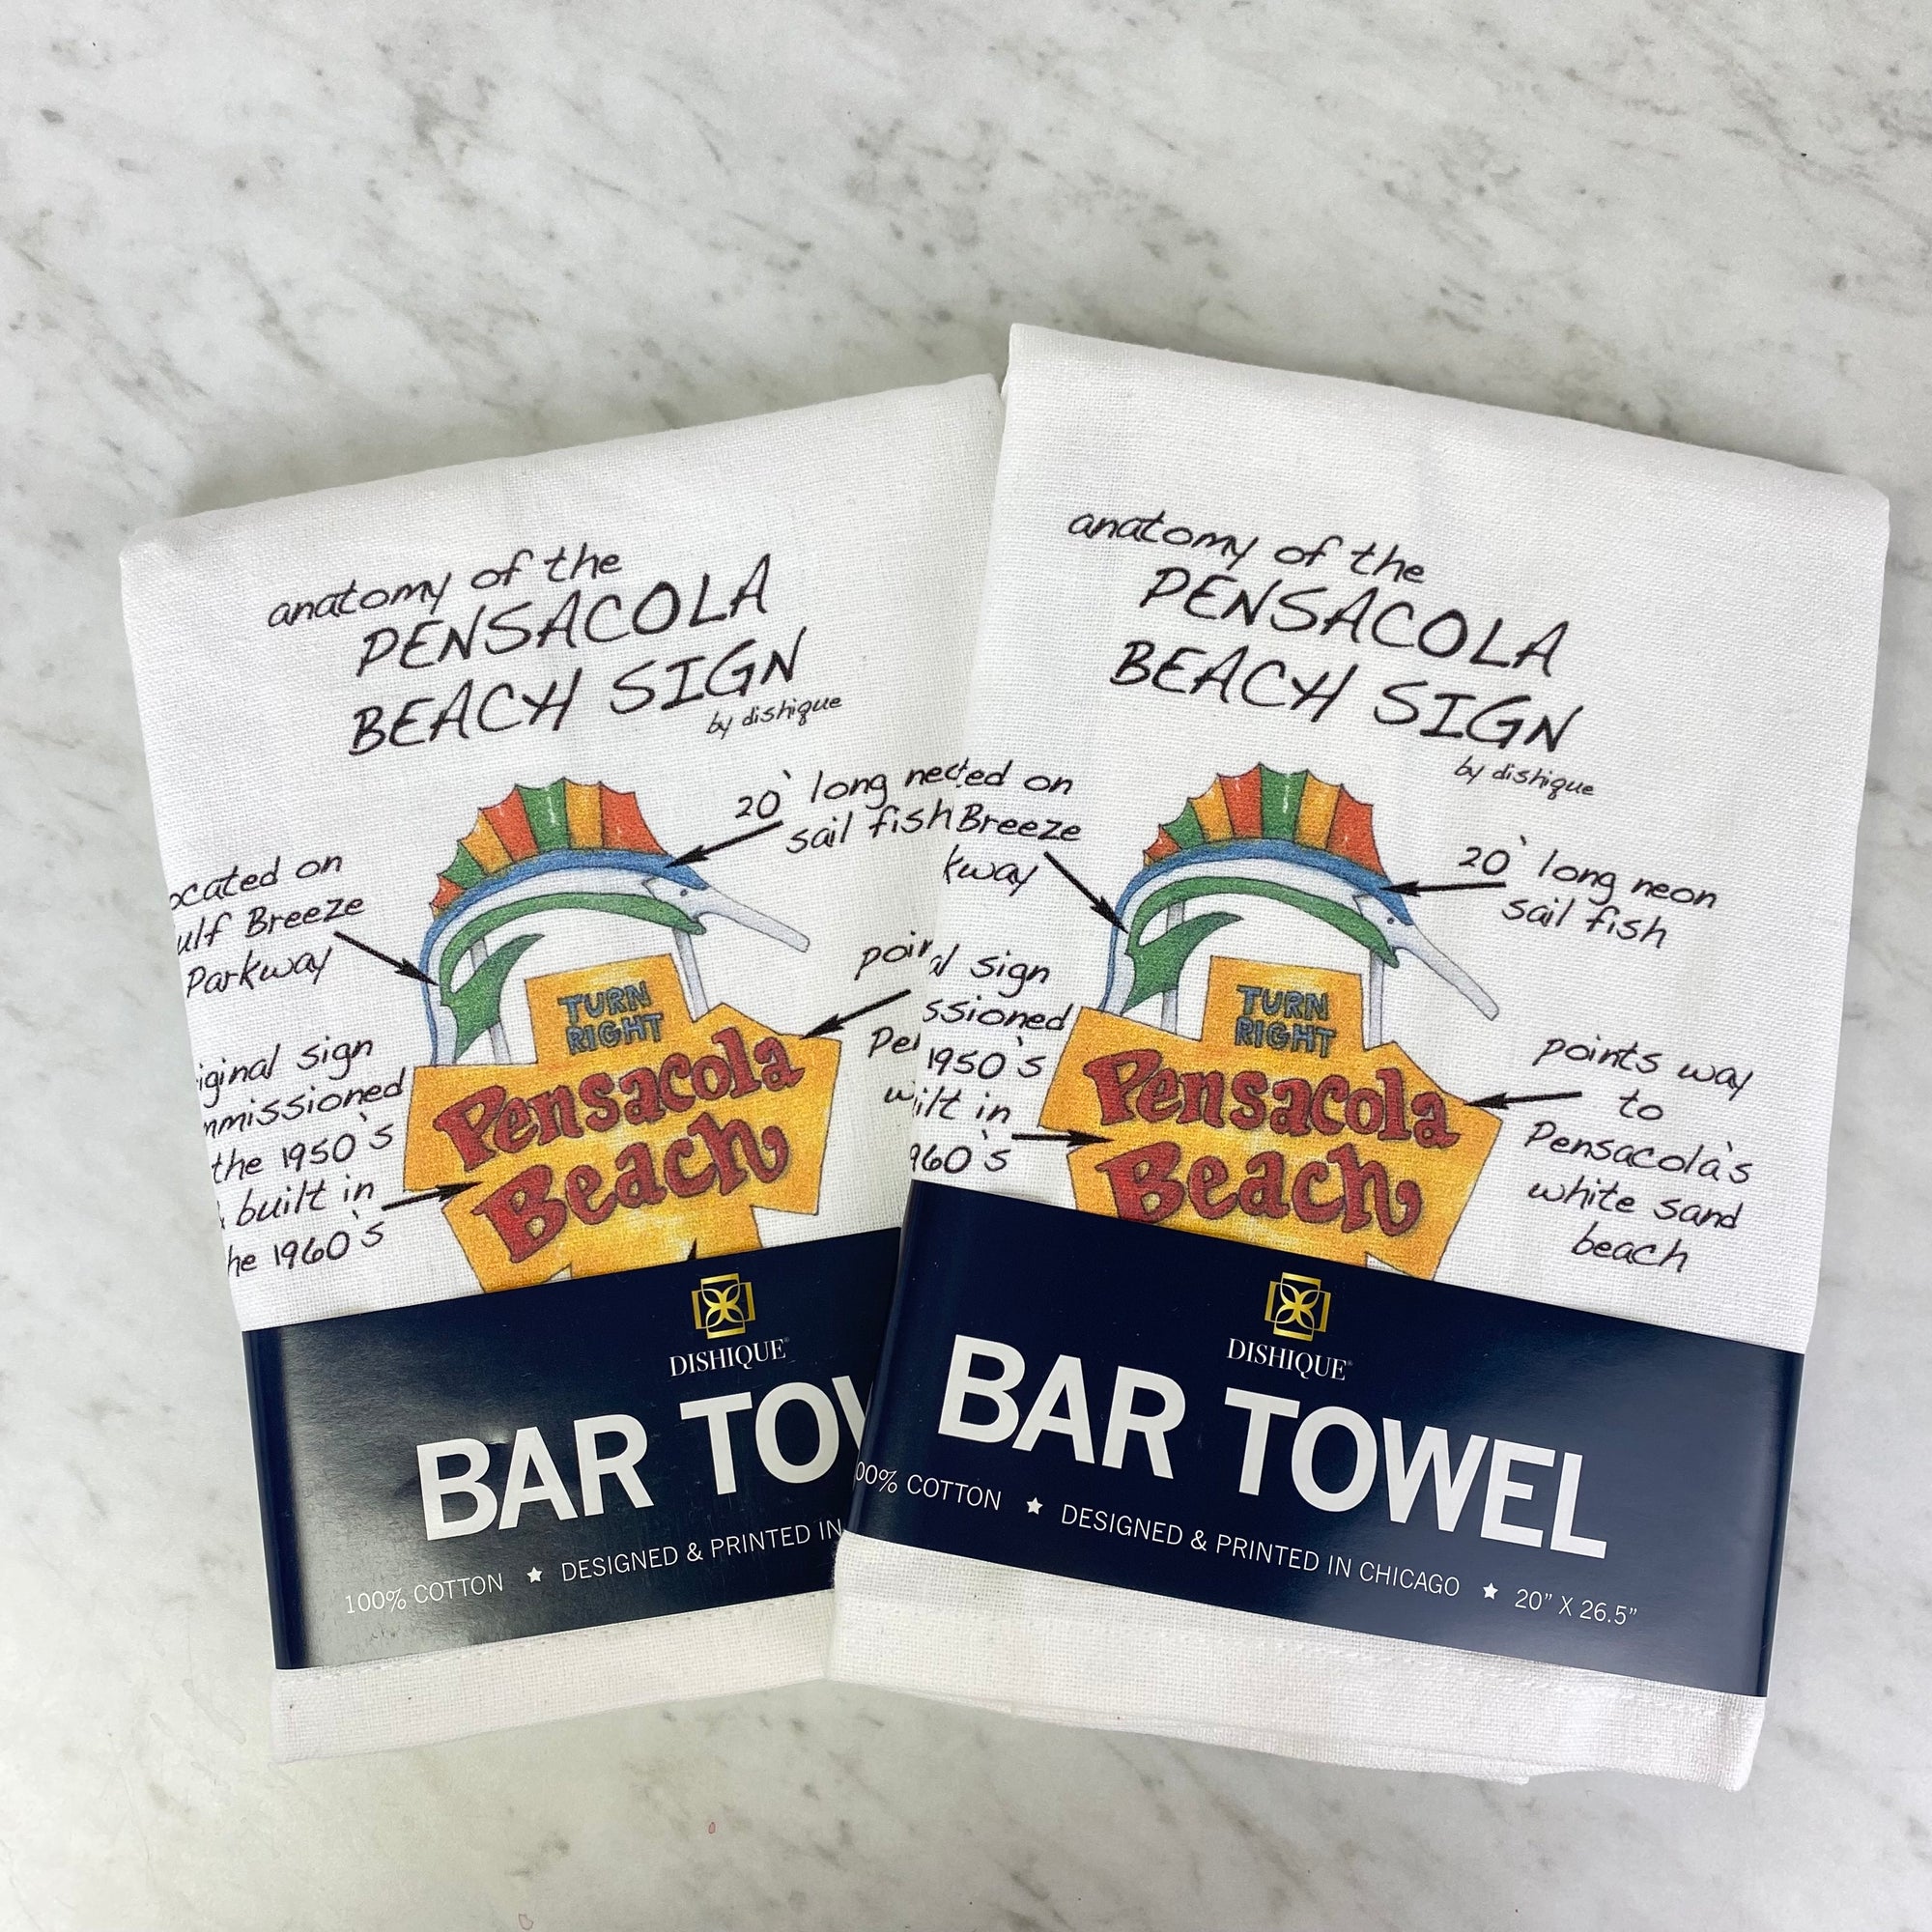 Discontinued towel bundle - Anatomy of the Pensacola Beach Sign - 2 tow